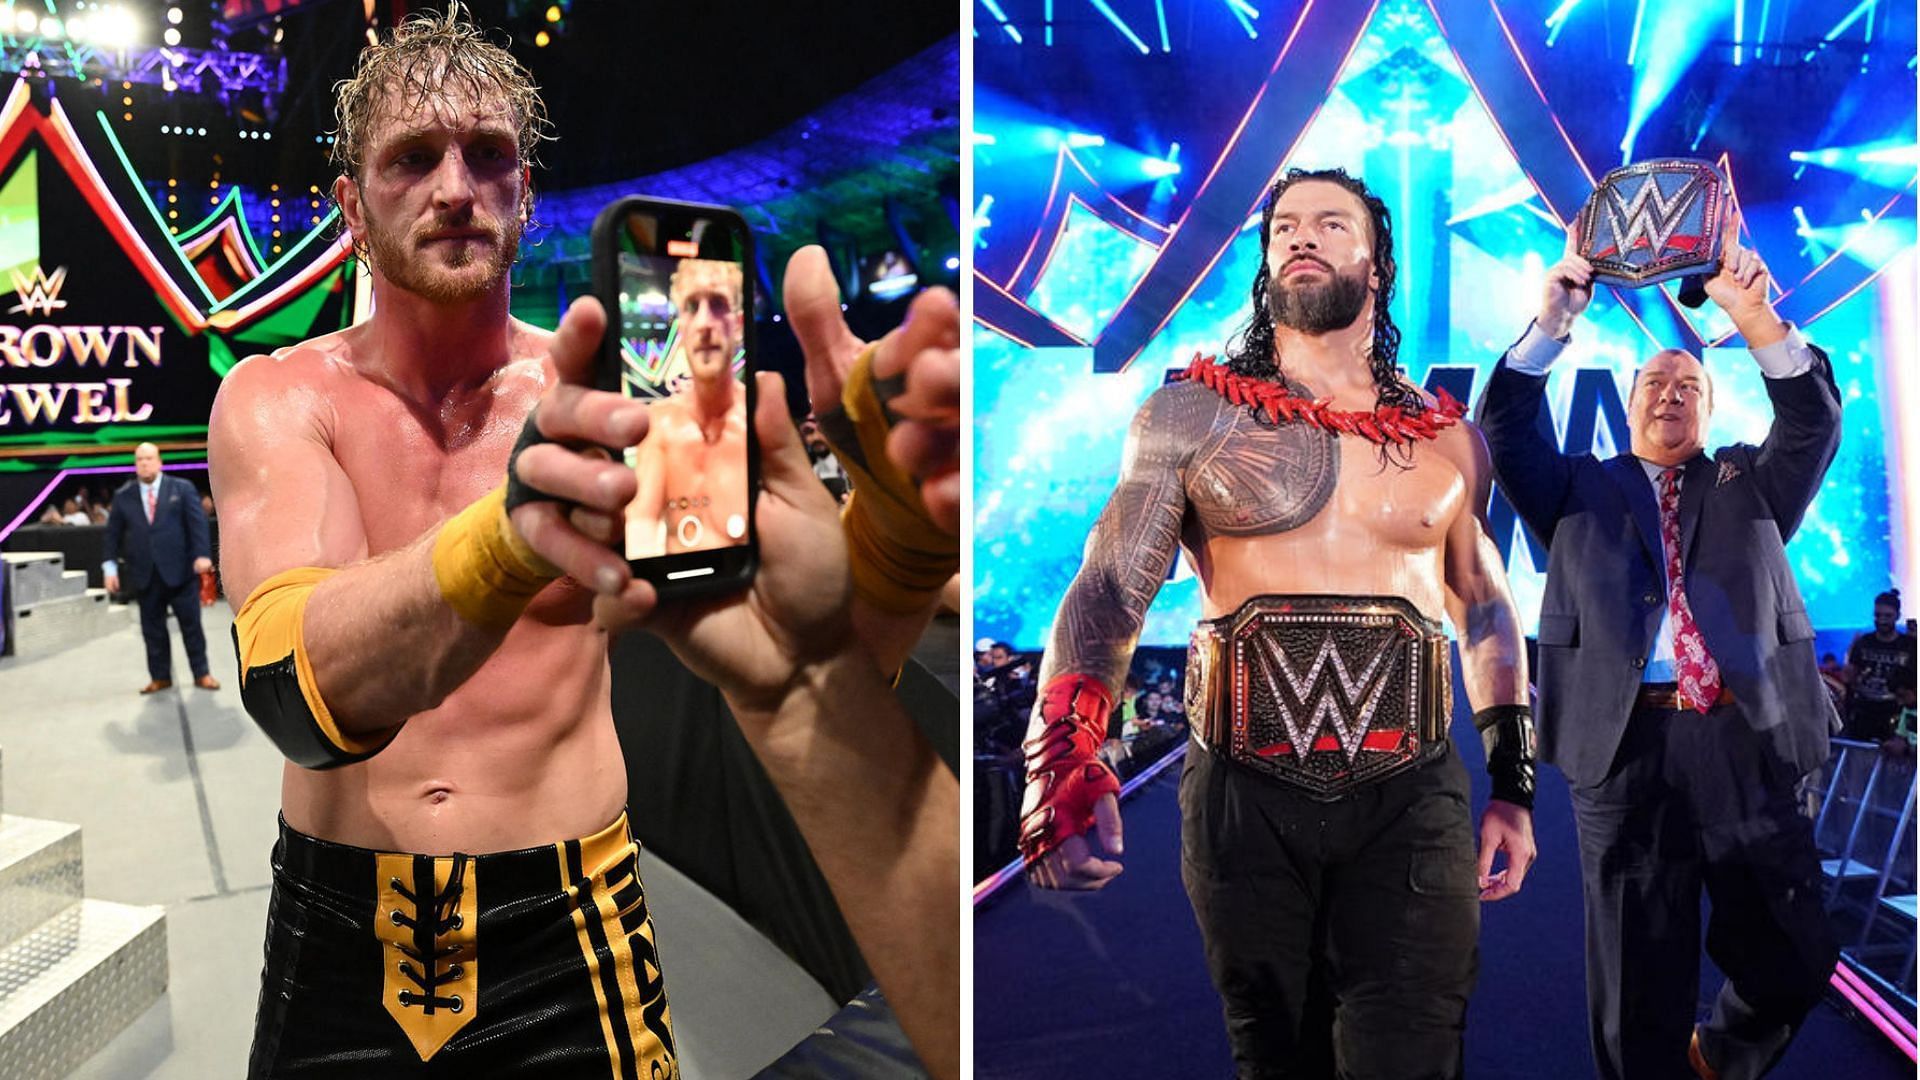 Logan Paul battled Roman Reigns for the title in the main event of WWE Crown Jewel 2022.